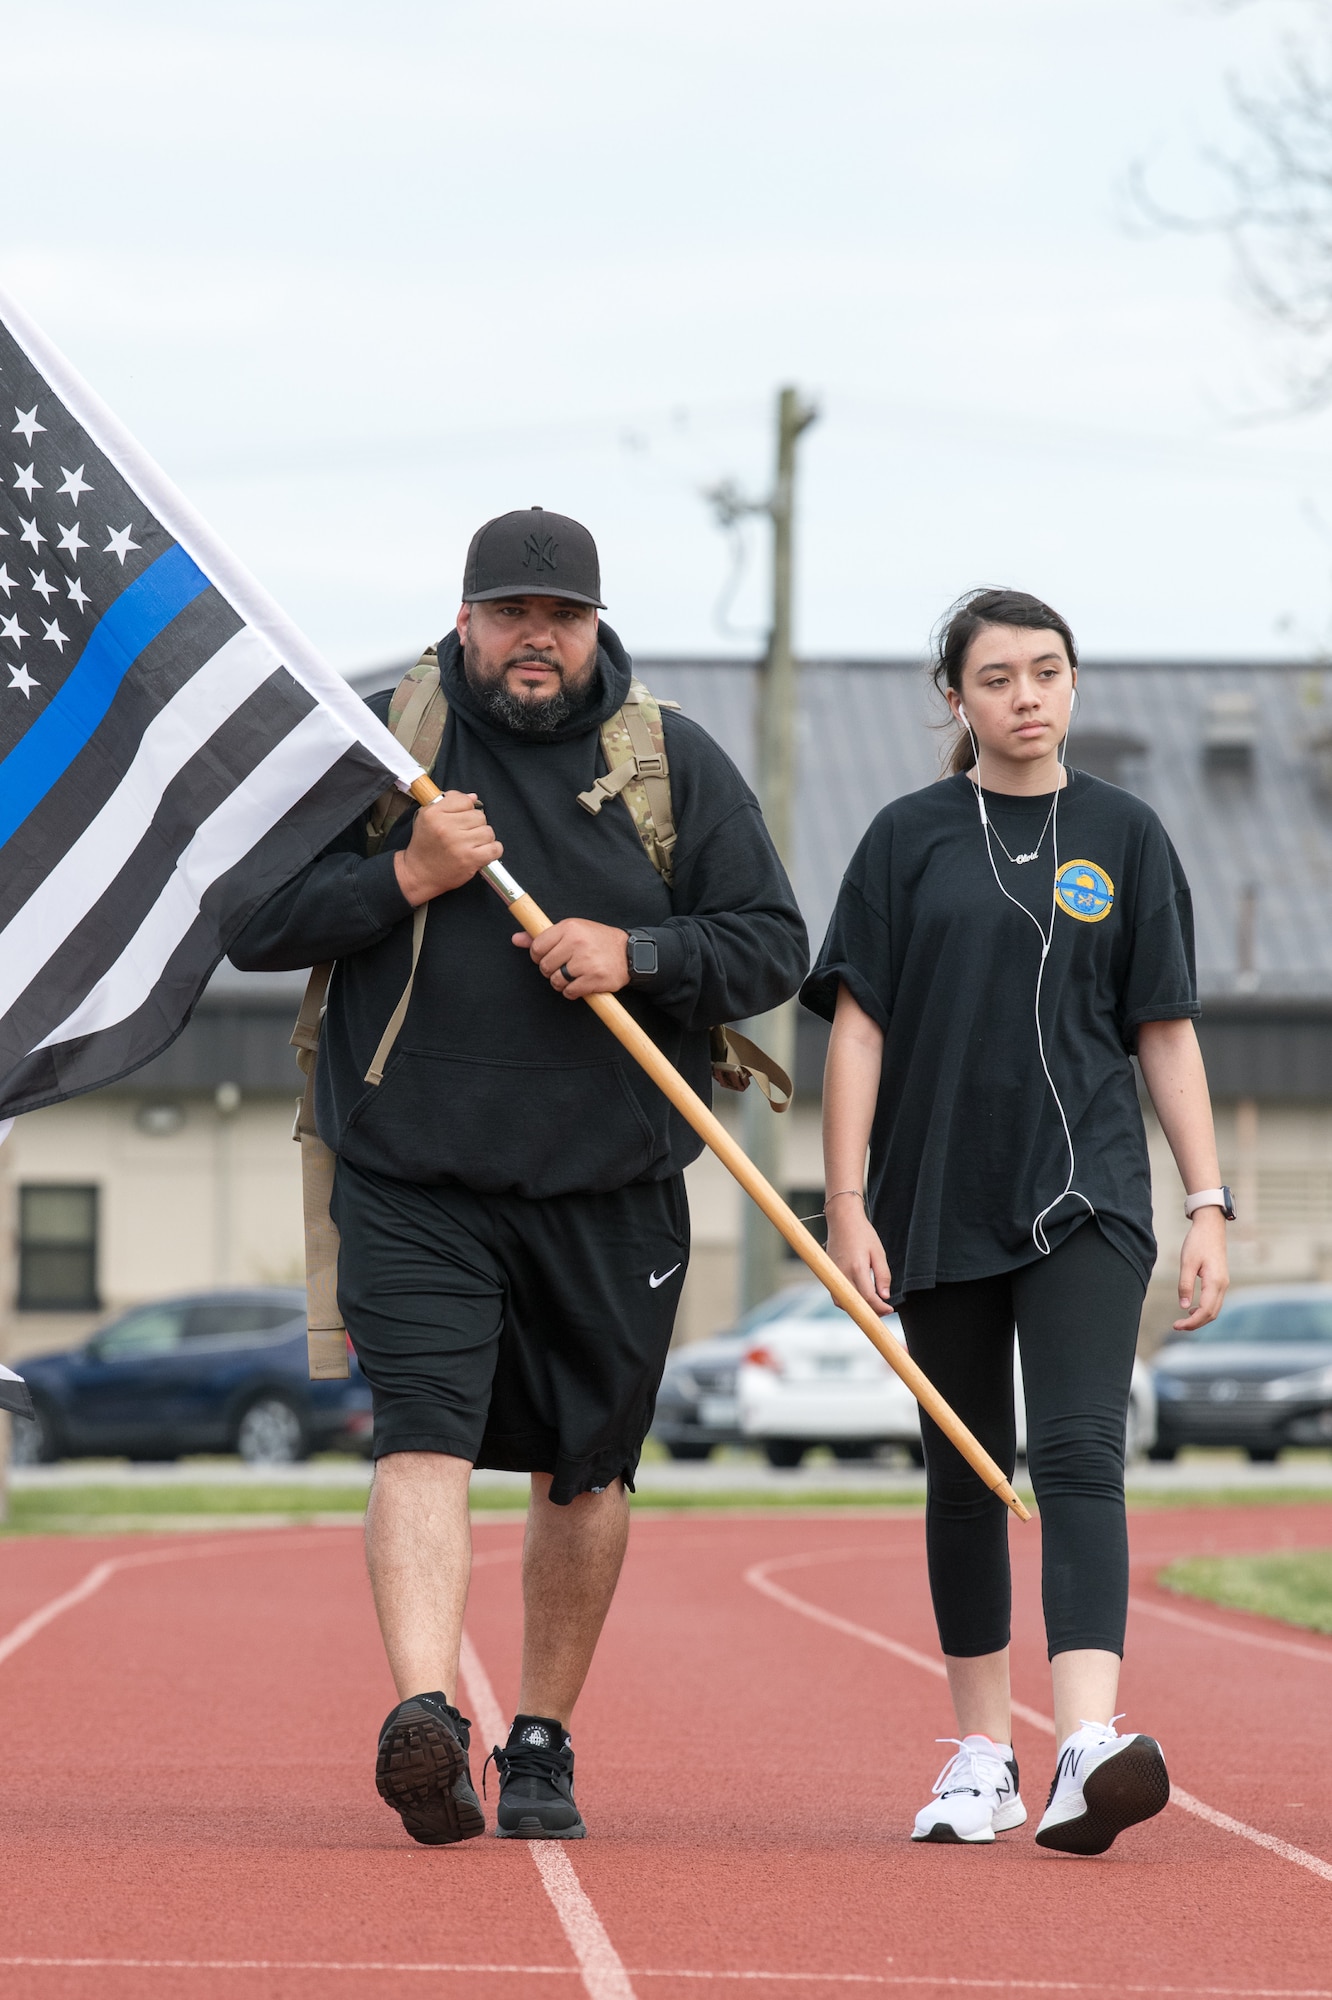 Detective Rafael Gonzalez, 436th Security Forces Squadron, walks with his daughter, Olivia, during the 2020 Police Week Ruck March May 14, 2020, at Dover Air Force Base, Delaware. Gonzalez is carrying a 35-pound ruck on his back and a “Thin Blue Line” version of the American flag, which represents support for law enforcement. (U.S. Air Force photo by Mauricio Campino)